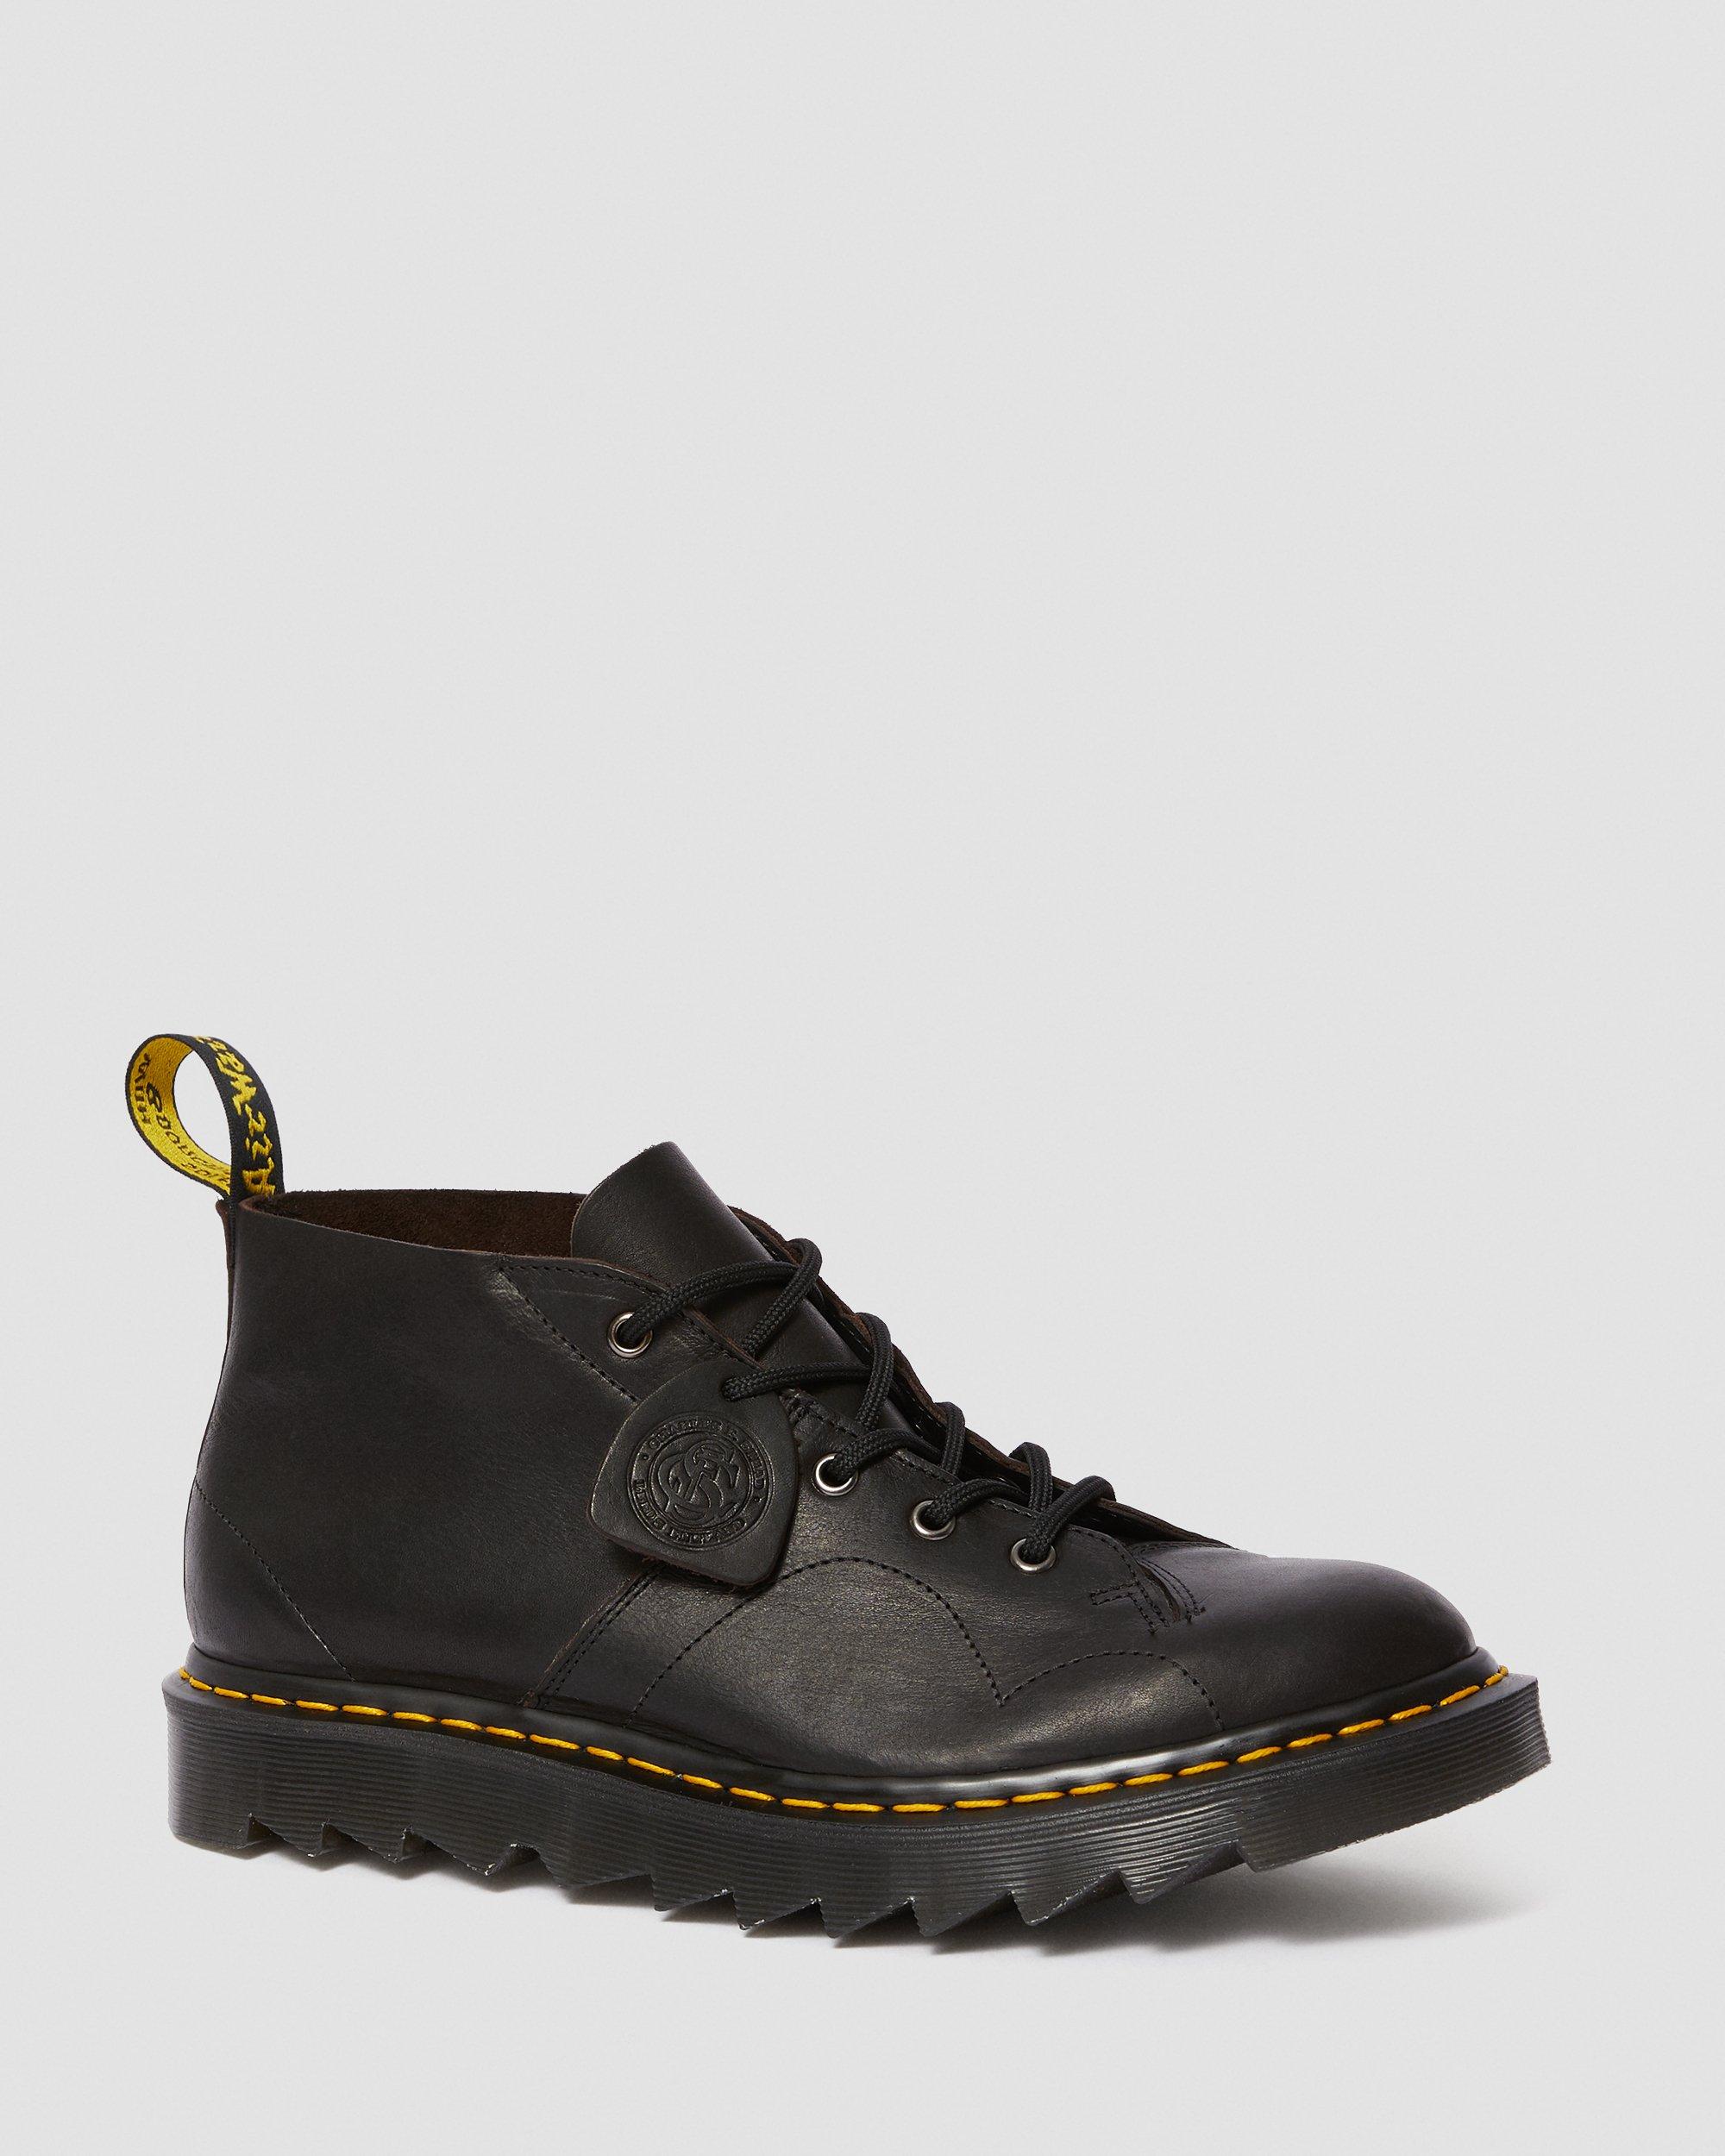 CHURCH RIPPLE SOLE | Dr. Martens Official